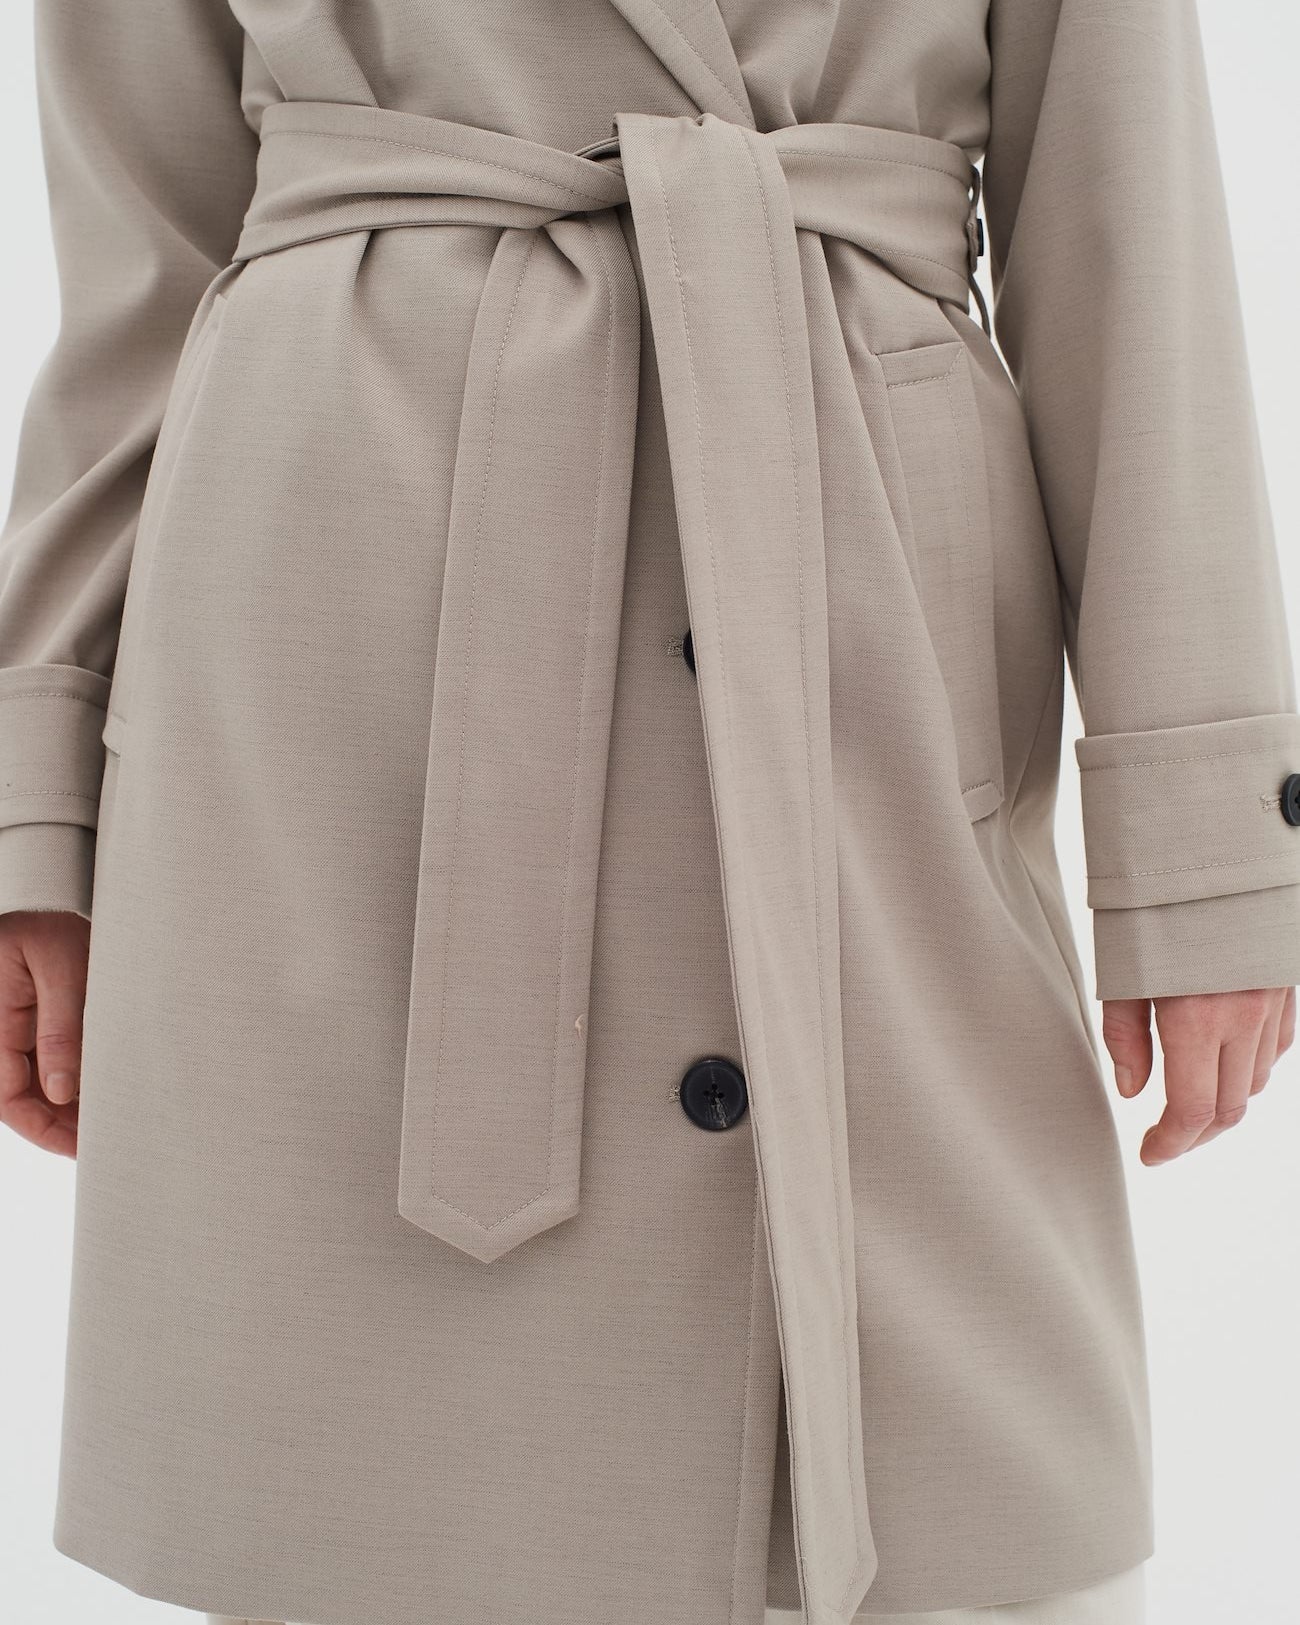 Inwear Tinah Taupe Belted Trench Coat